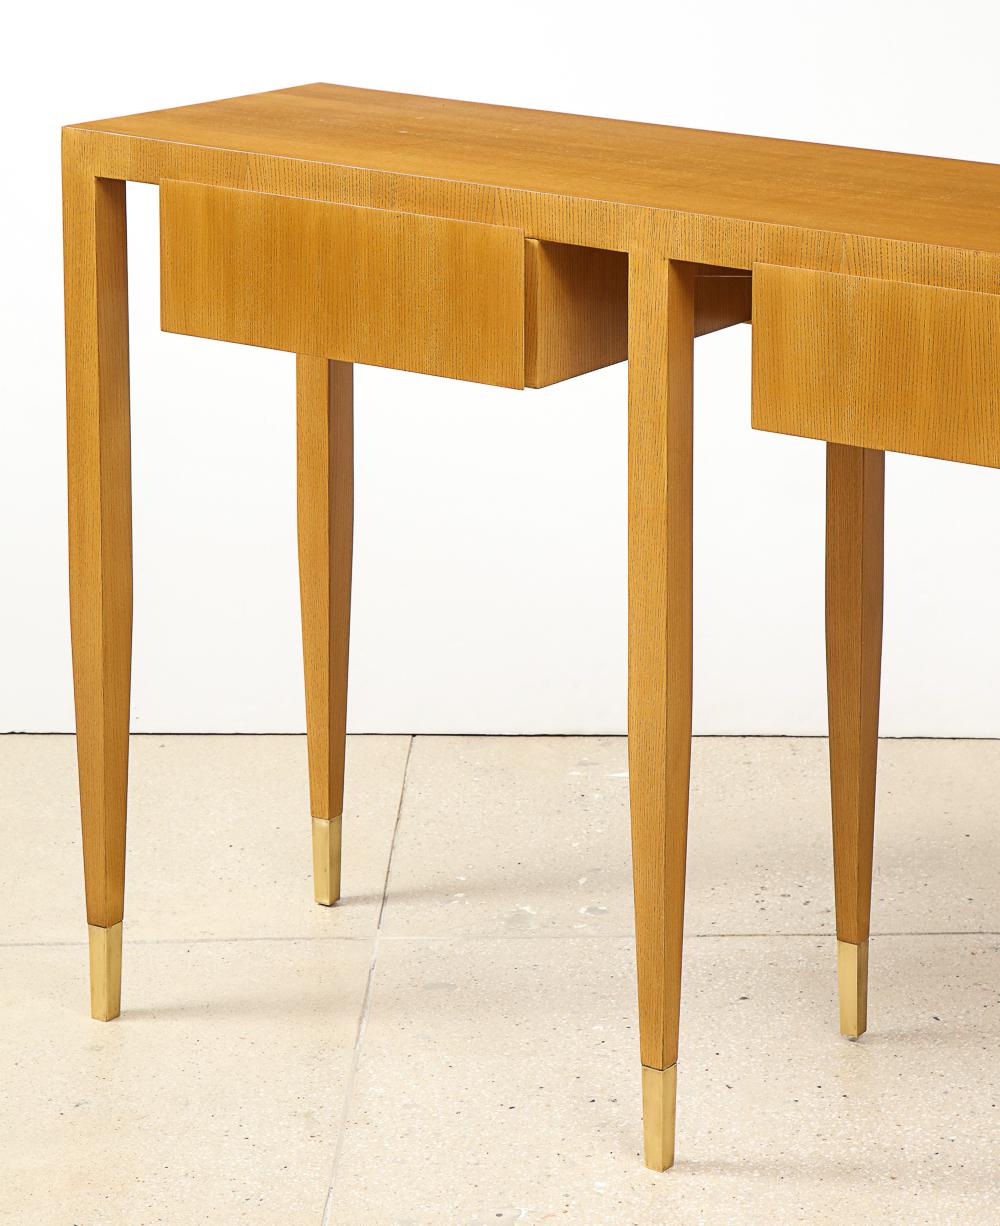 Ash wood with brass feet. Probably produced by Giordano Chiesa. A rare, custom Gio Ponti design with two large drawers, narrow, tapering legs, & brass feet. This piece has been authenticated by the Gio Ponti Archives. Provenance: Private collection,